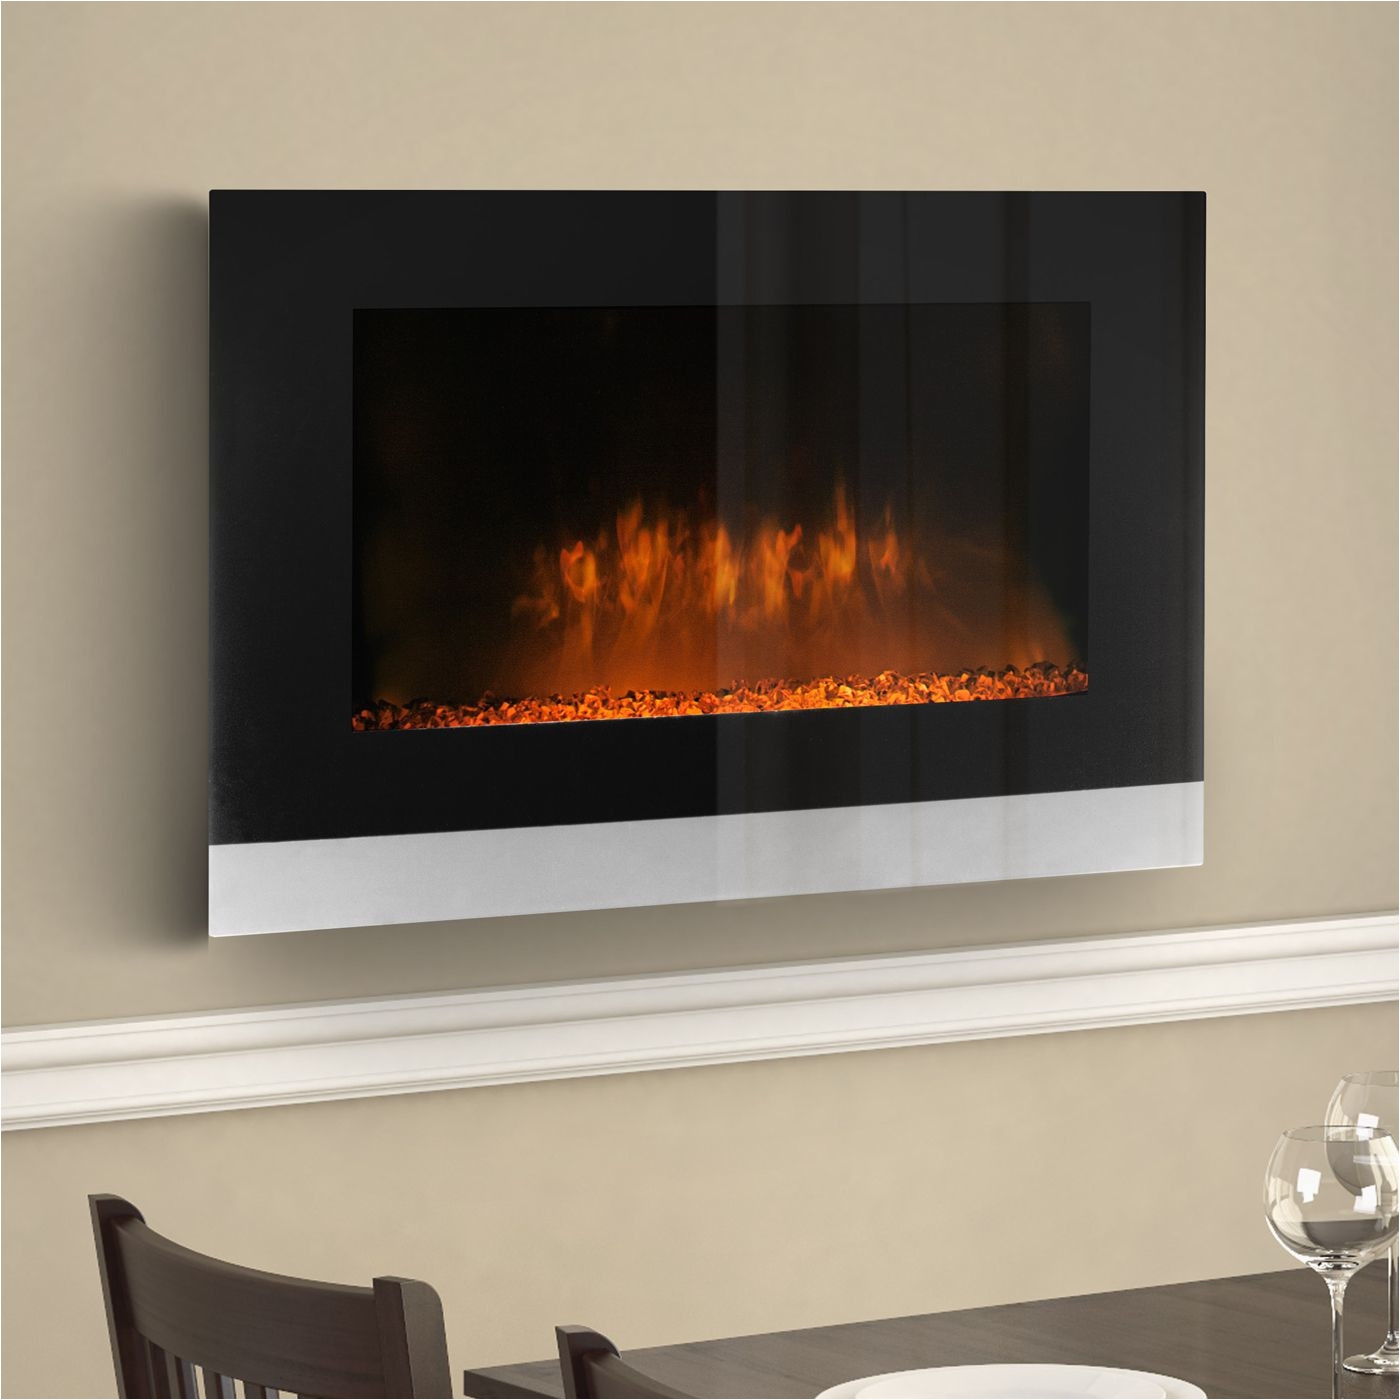 wall mount electric fireplace menards unique 11 awesome lowes electric fireplace heaters